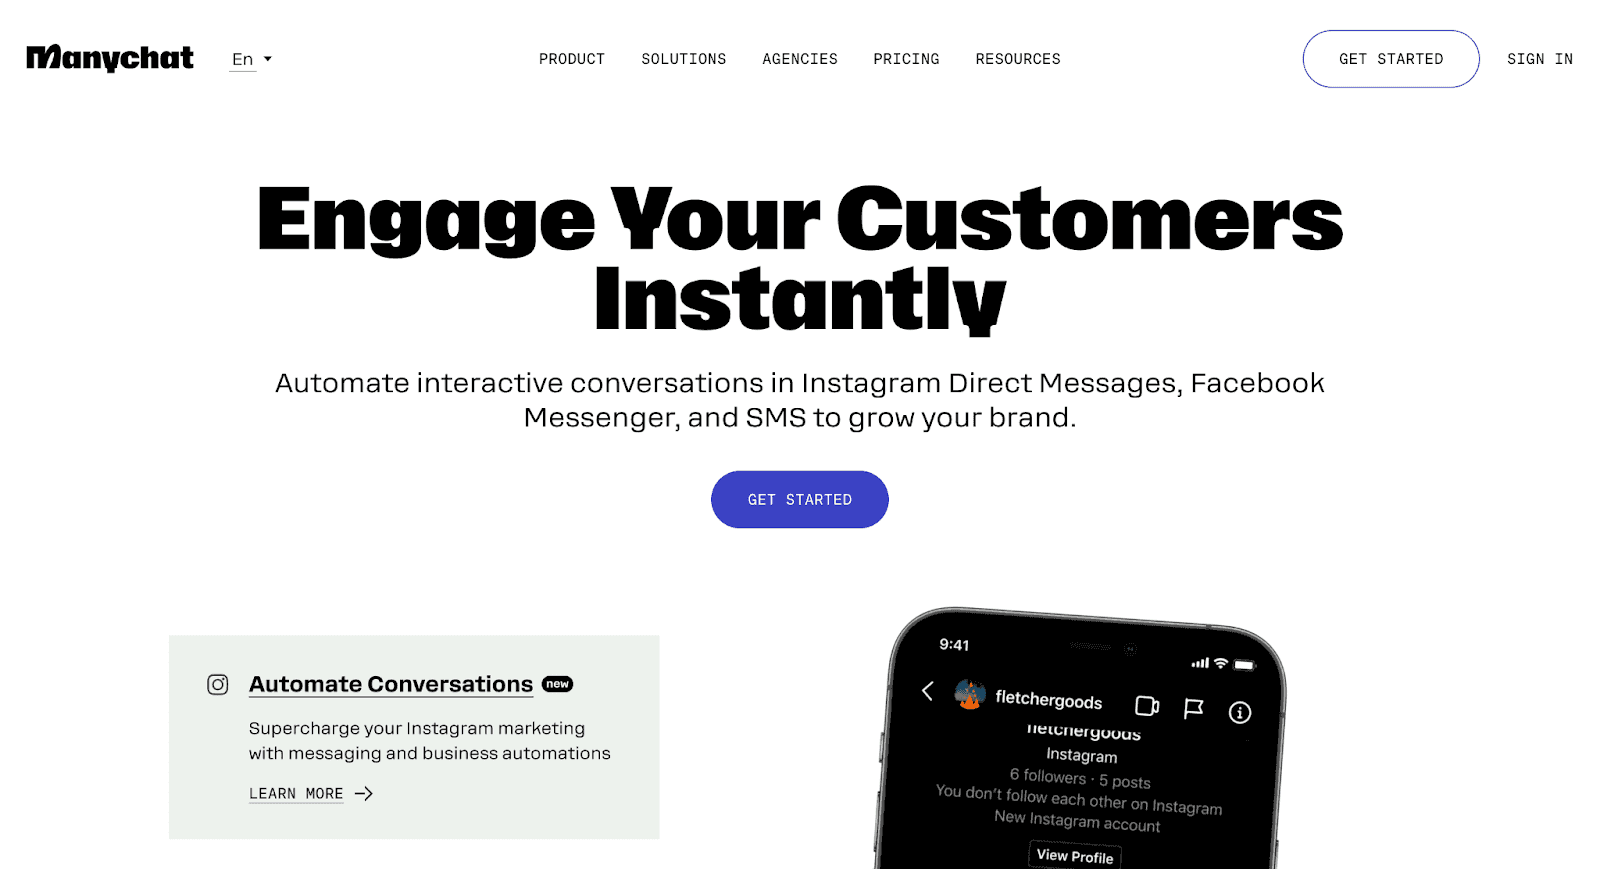 Manychat website - Engage your customers instantly